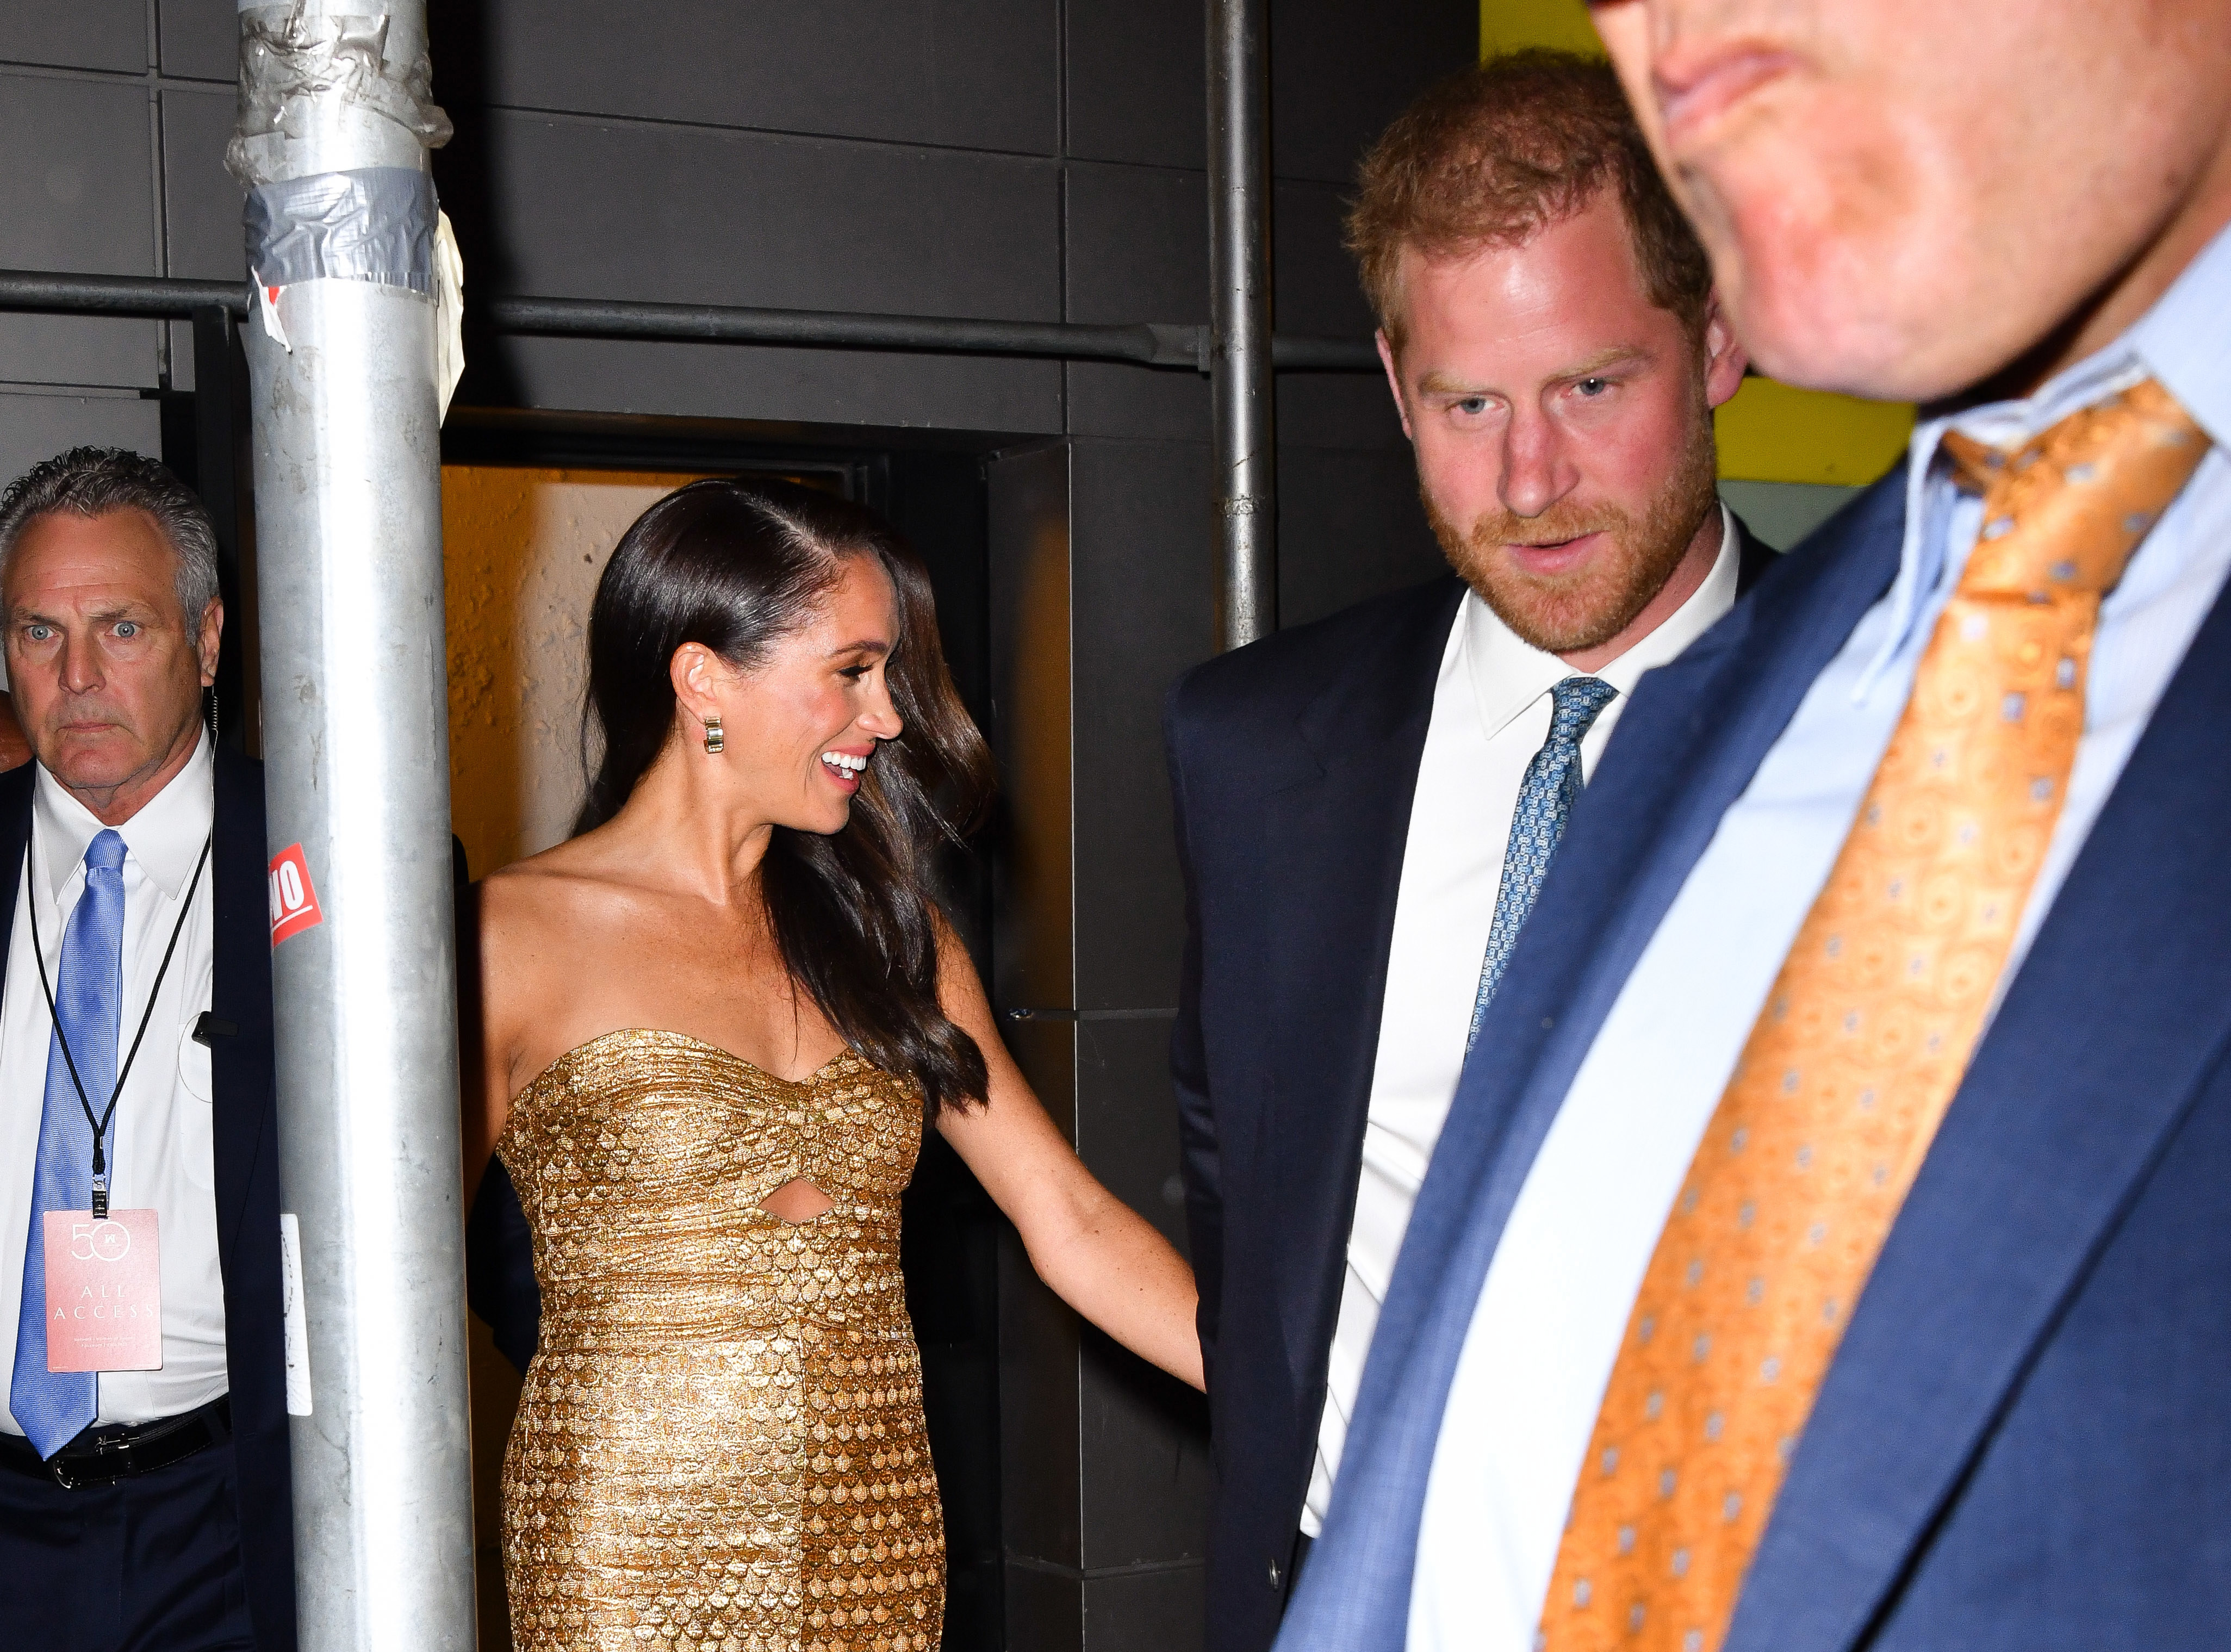 Meghan Markle, Duchess of Sussex, and Prince Harry, Duke of Sussex leave The Ziegfeld Theatre on May 16, 2023 in New York City. (Photo by James Devaney/GC Images)